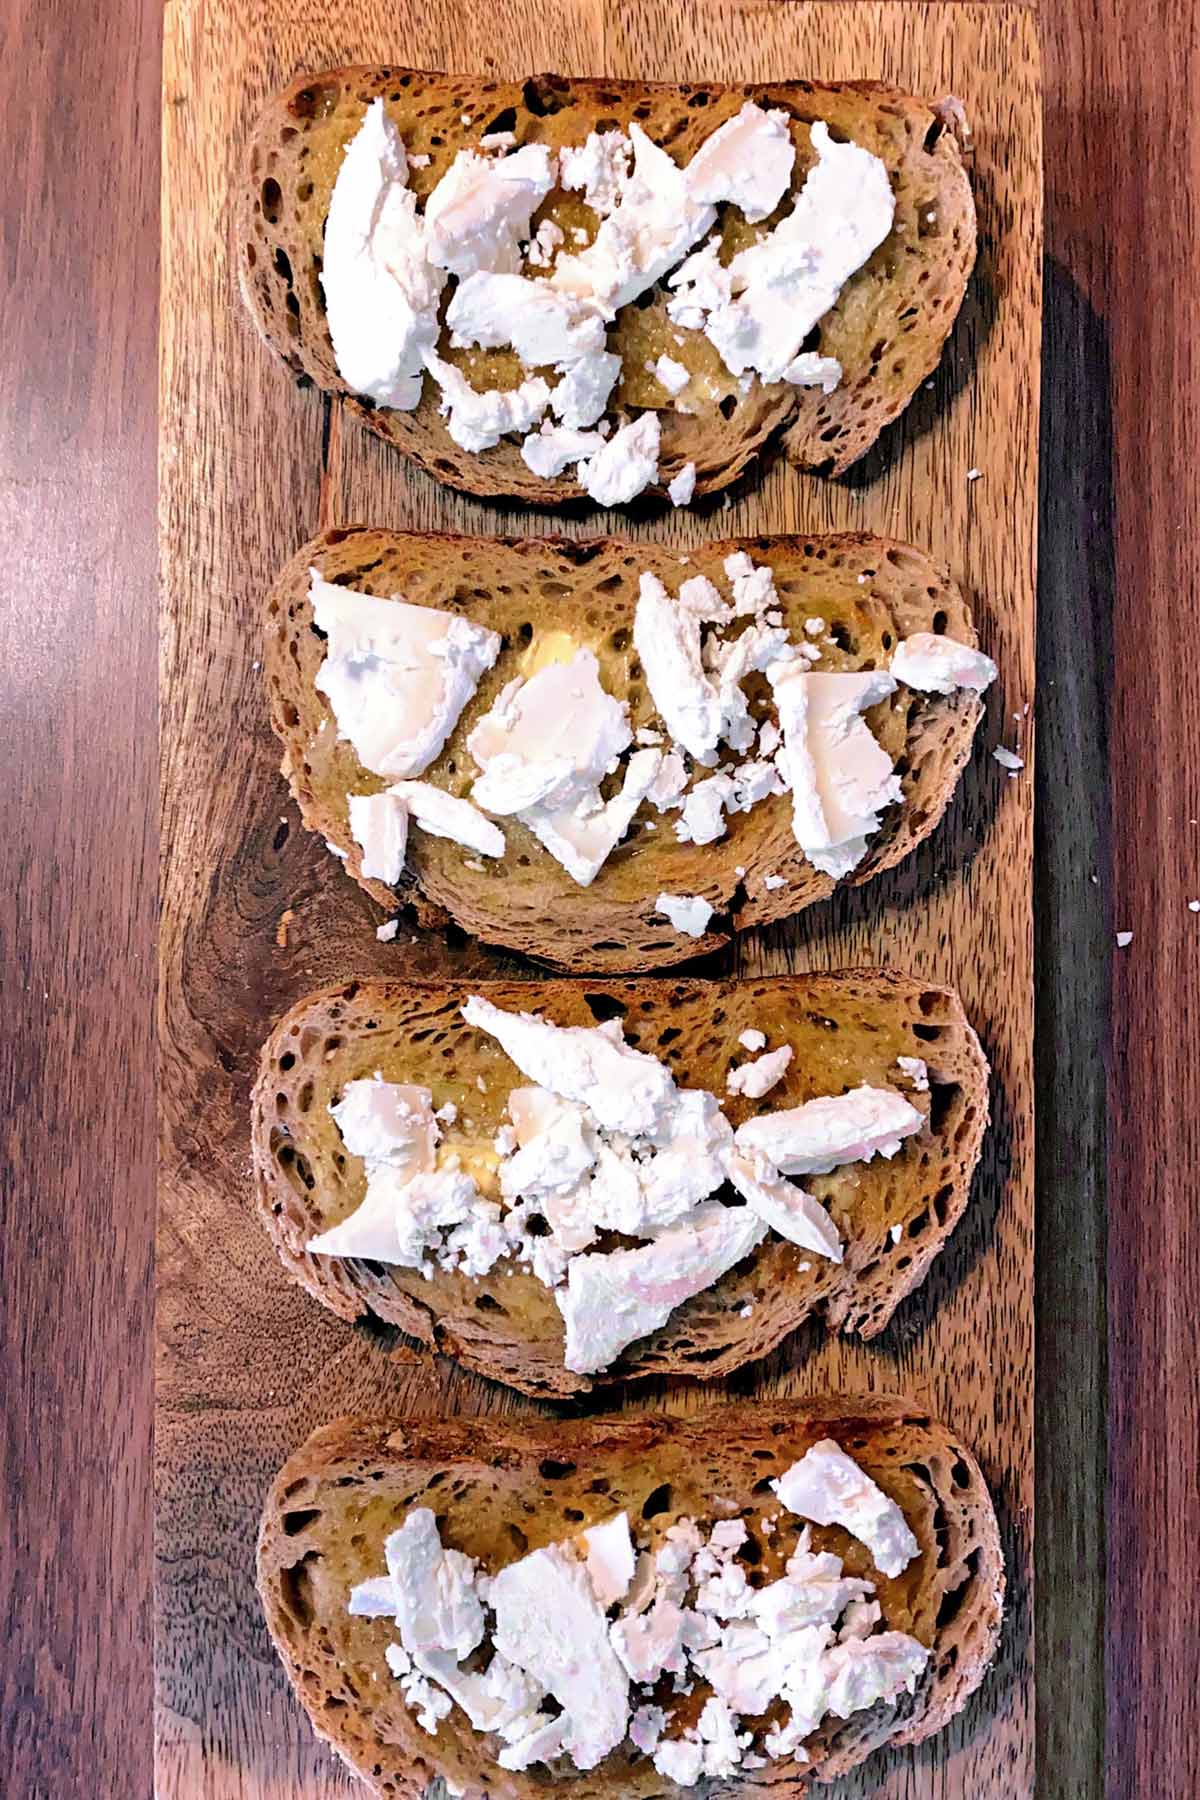 Goat's cheese added to the toast.